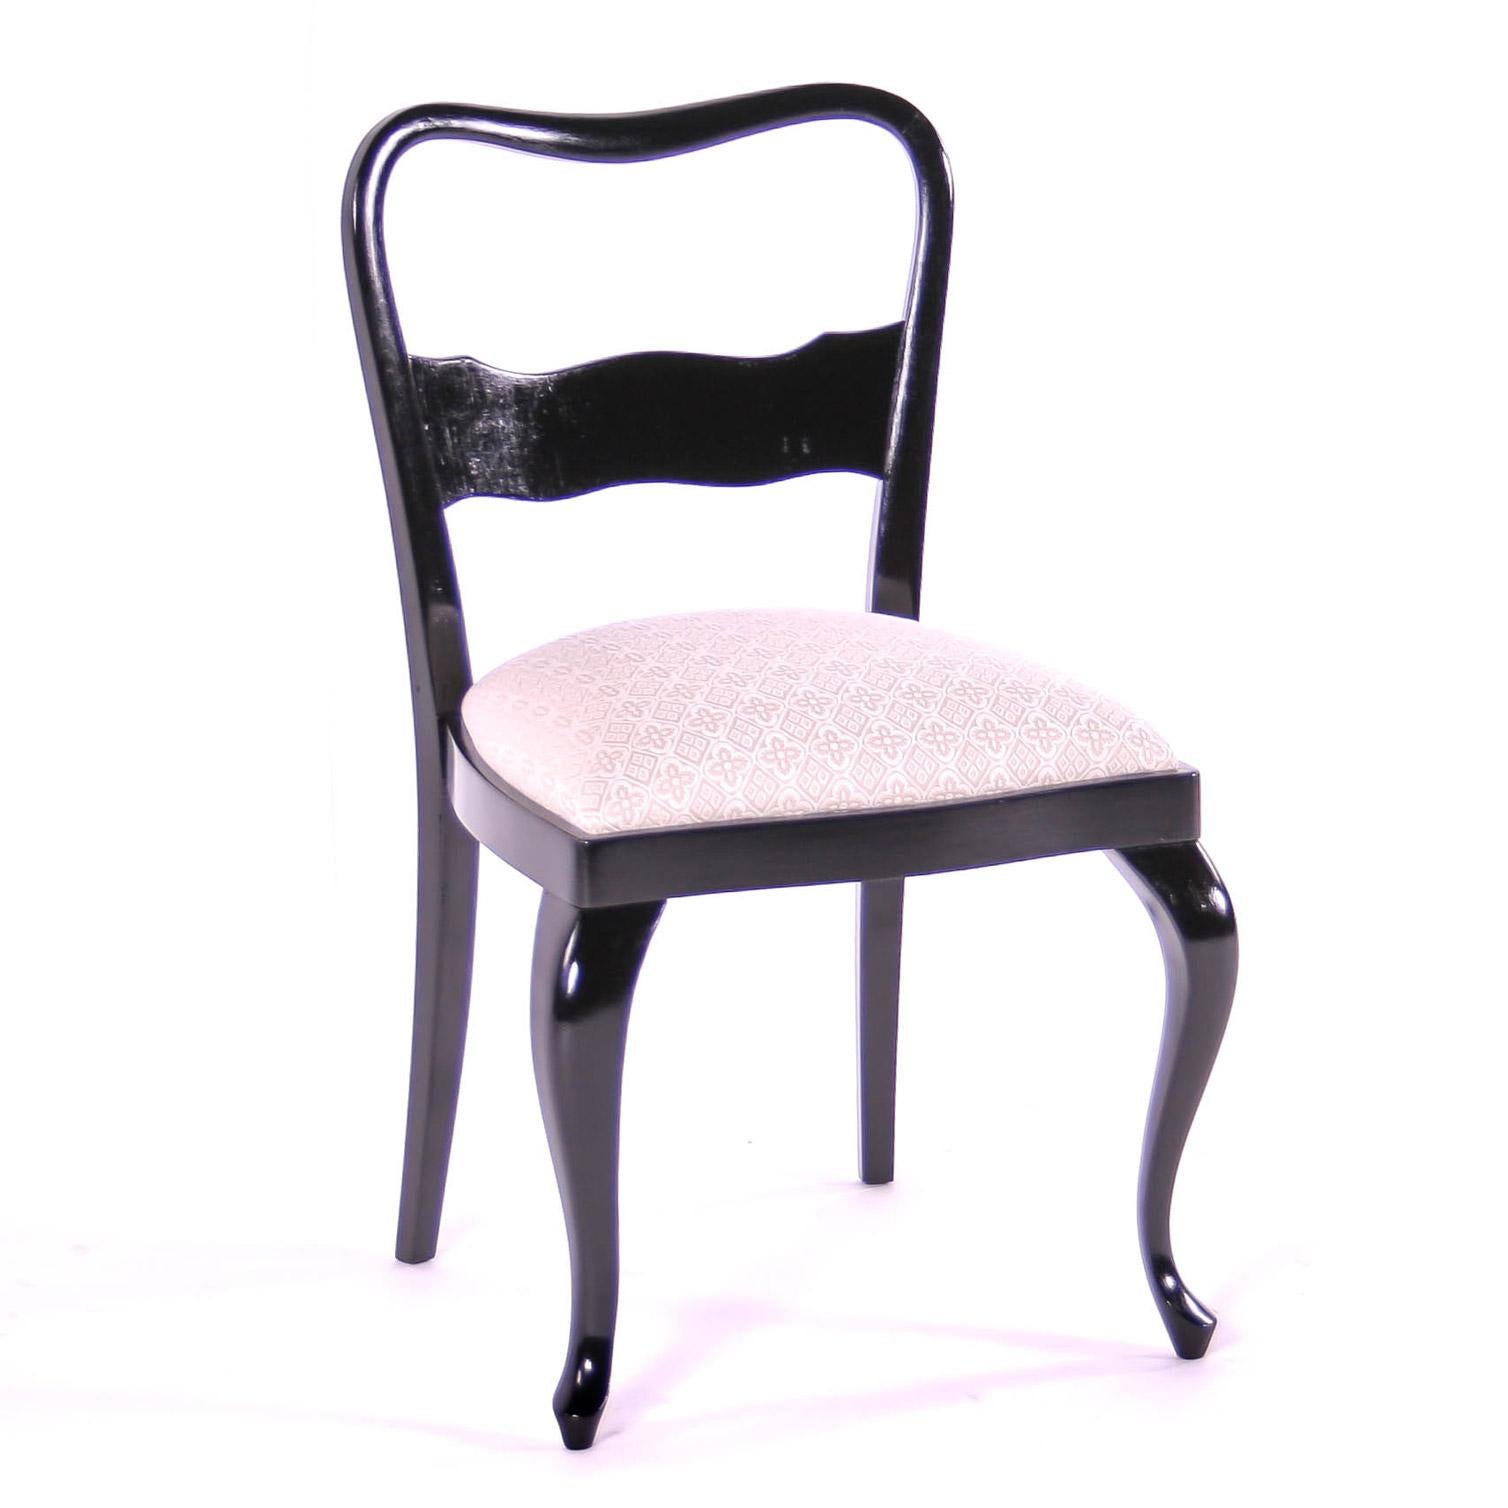 Czech Historism Design Black and White Dining Chairs In Good Condition For Sale In Chocen, Czech Republic